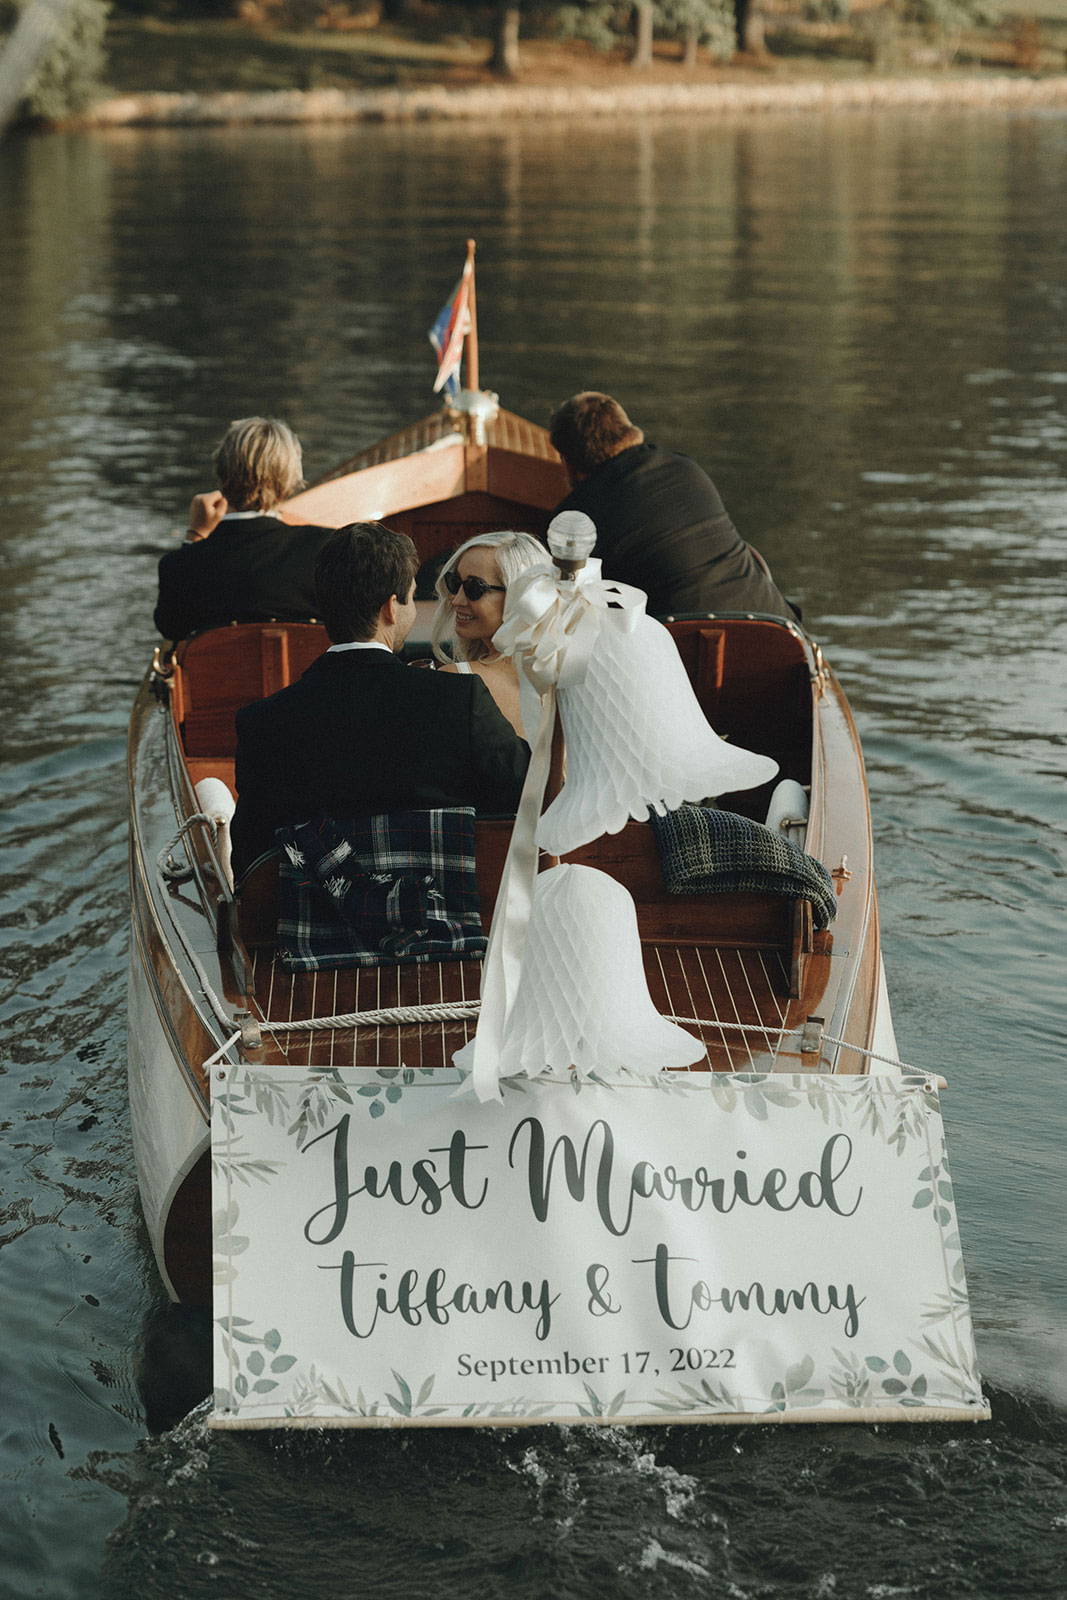 Bride and Groom on small boat with 'Just Married' sign attached at the back